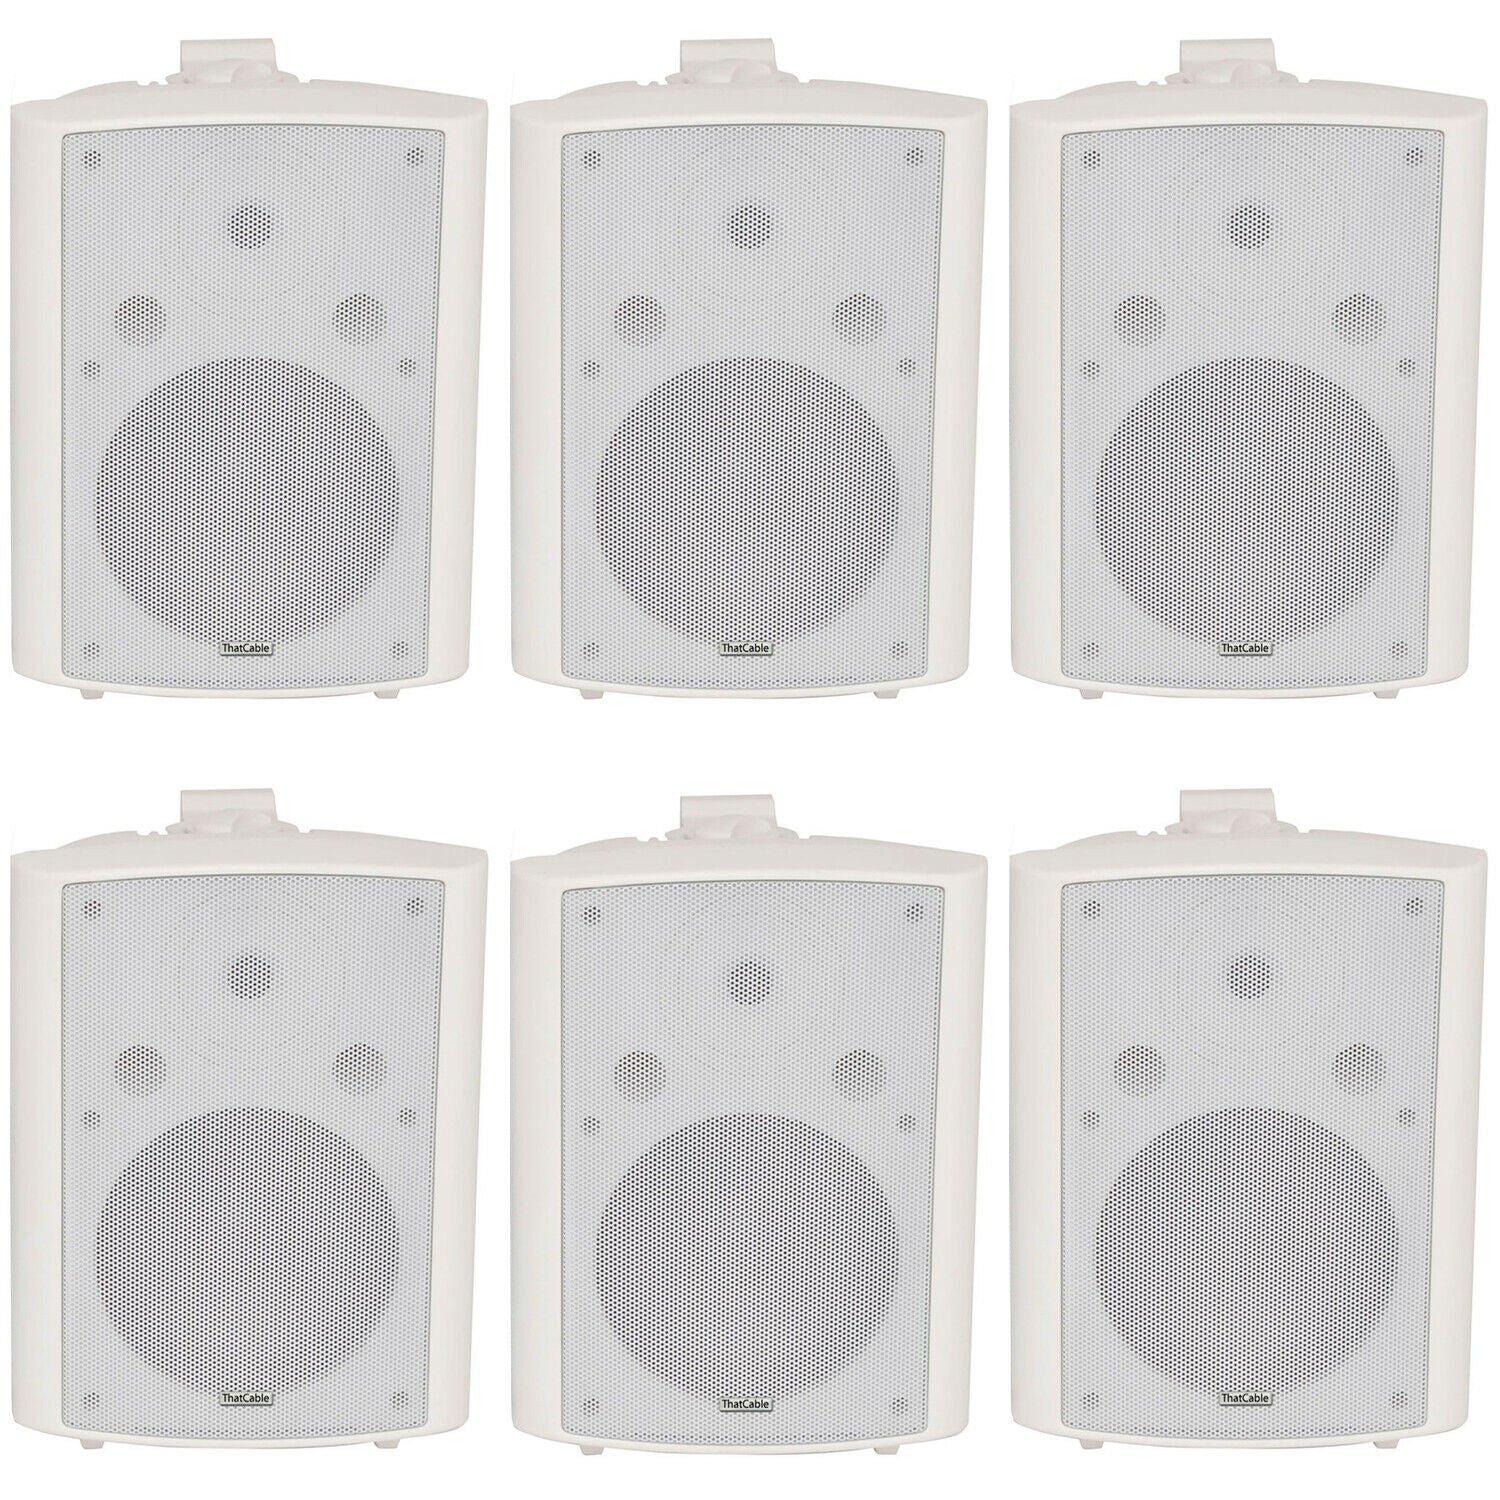 6x 180W White Wall Mounted Stereo Speakers 8